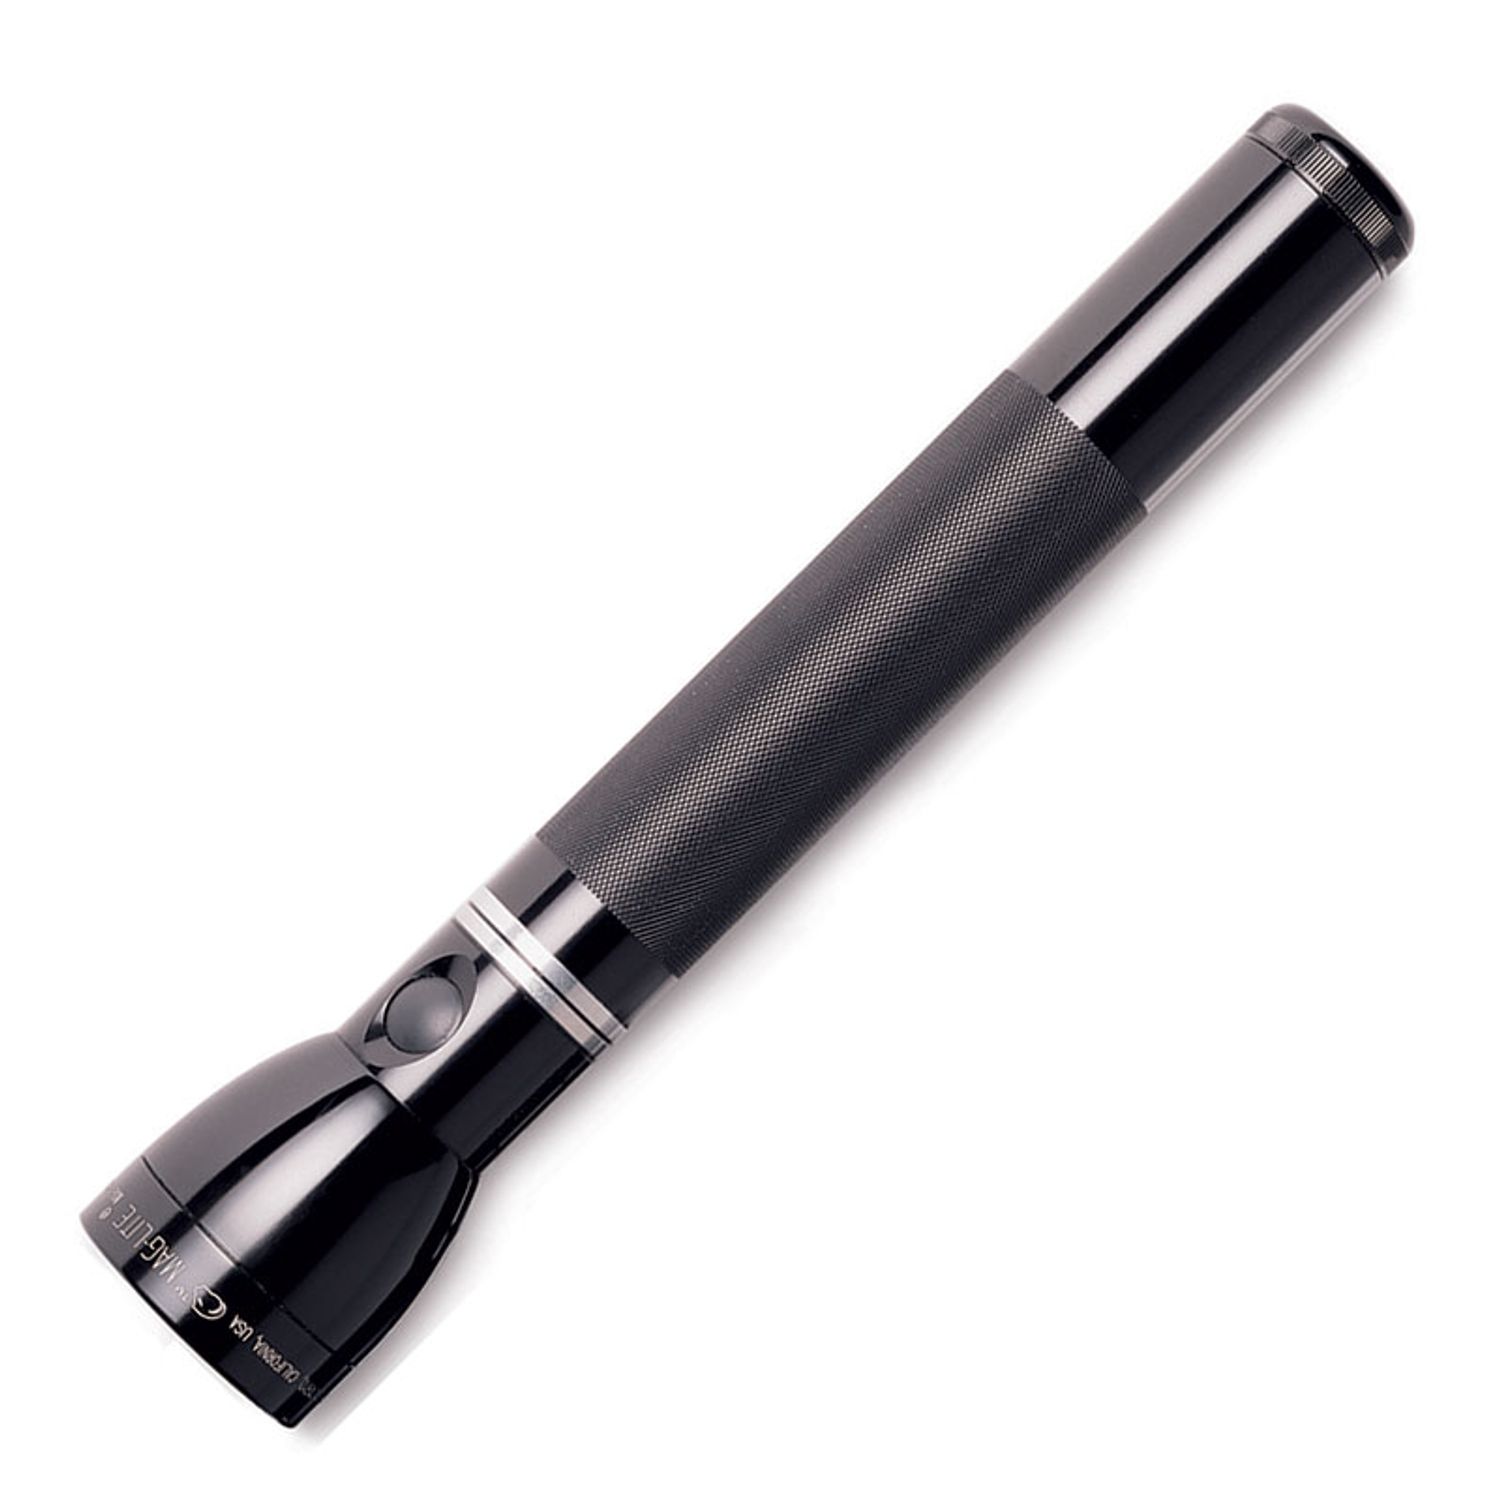 Maglite Mag Charger Flashlight Only - KnifeCenter - ARXX014 - Discontinued